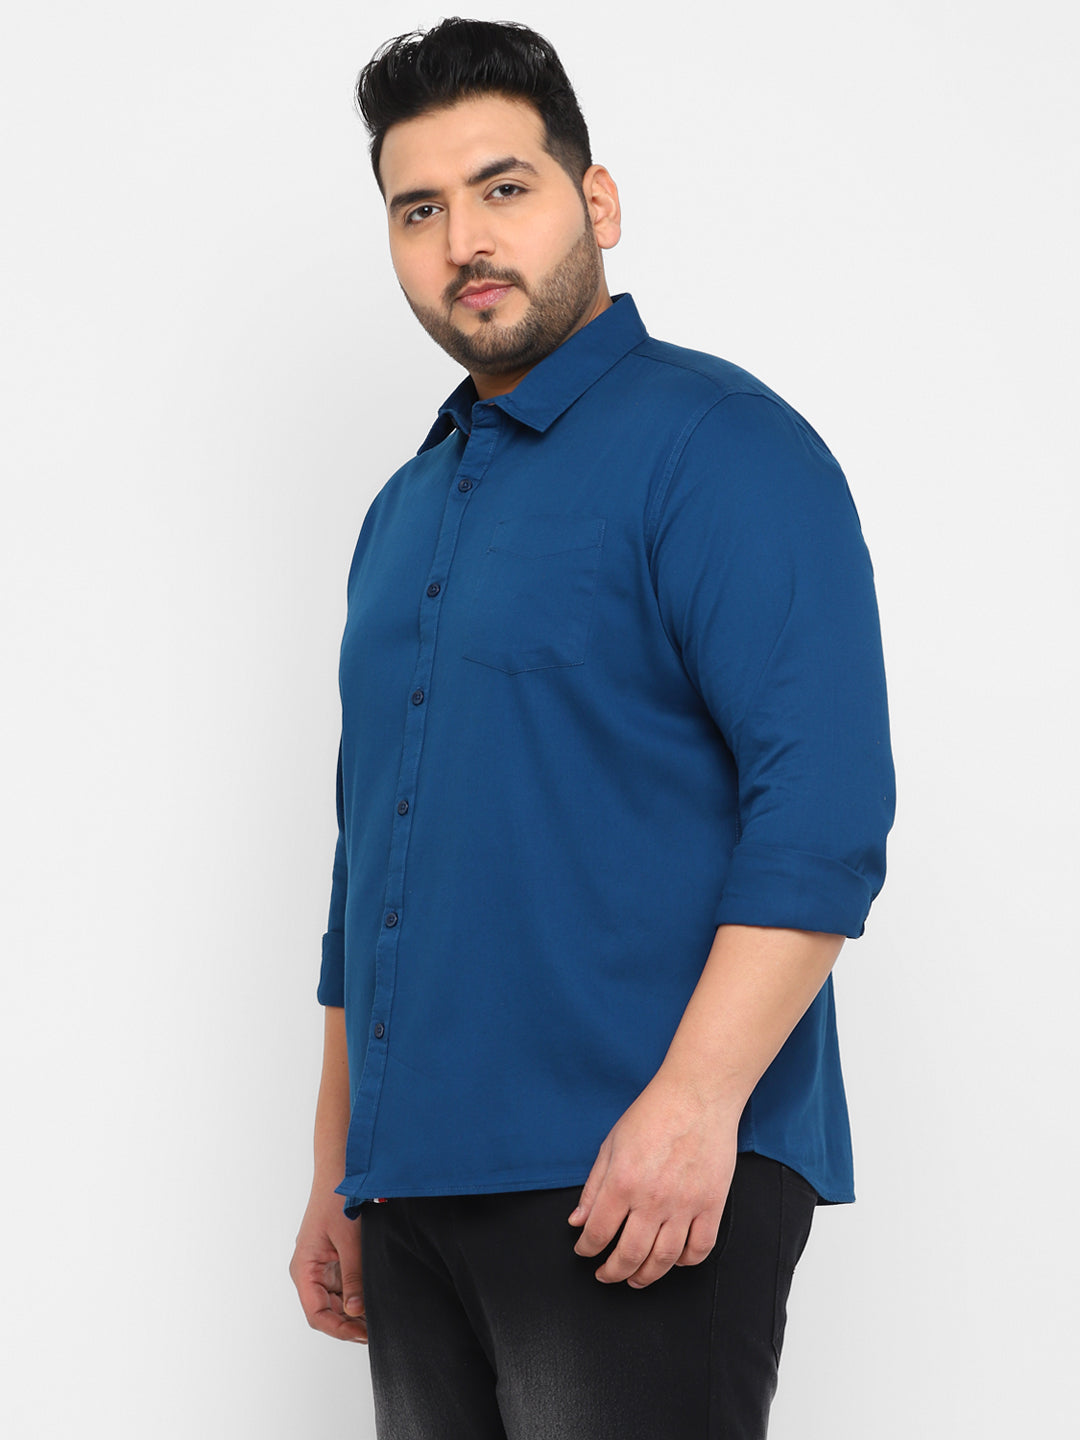 Plus Men's Blue Cotton Full Sleeve Regular Fit Casual Solid Shirt